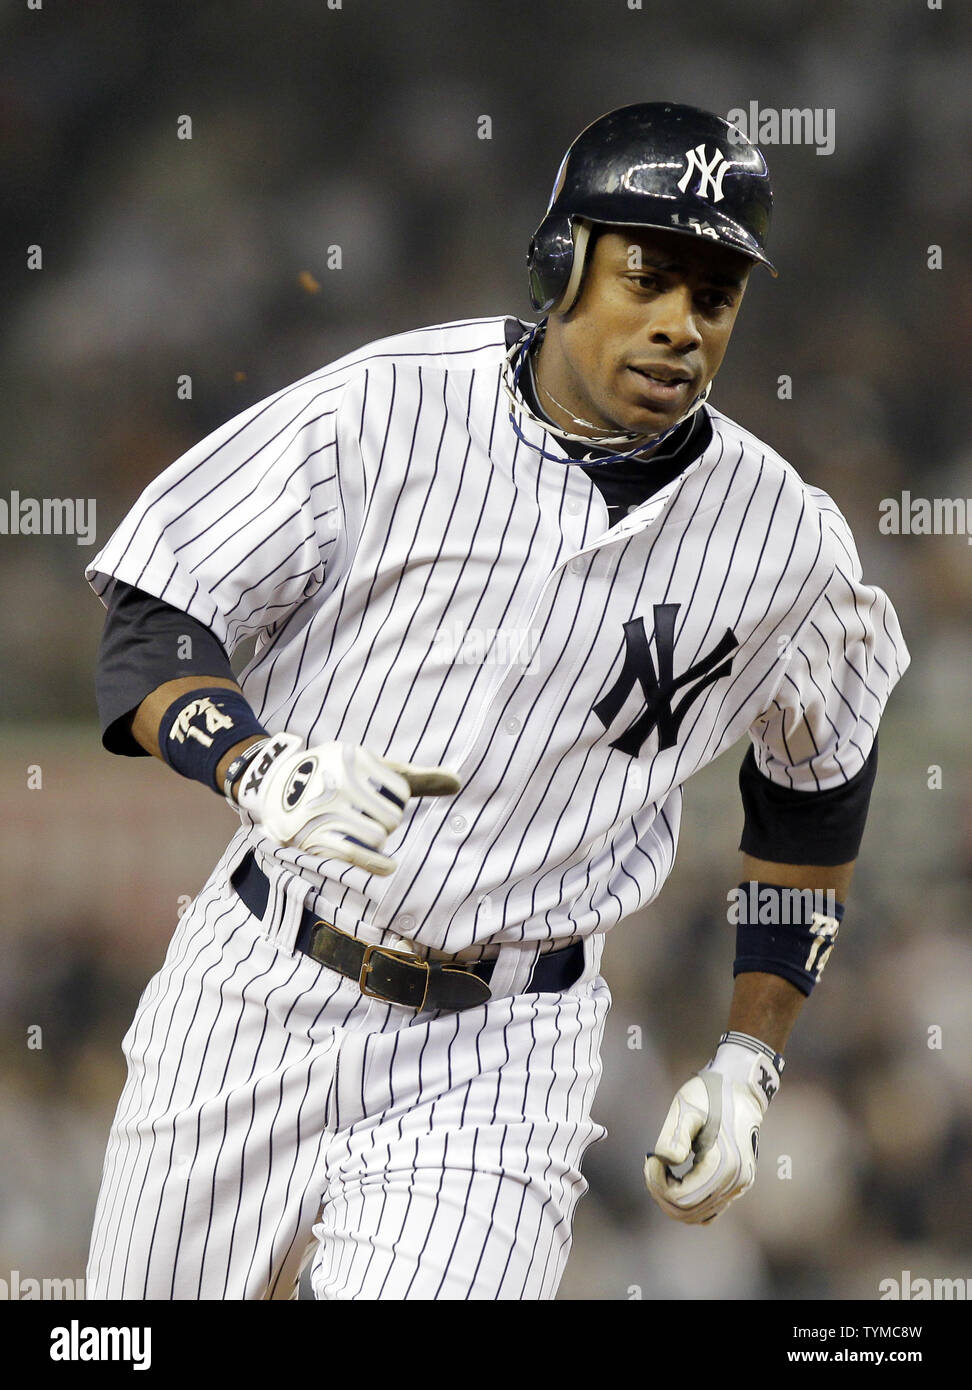 New York Yankees Curtis Granderson hits a solo homer against the New York  Mets in the sixth inning at Yankee Stadium in New York City on May 21,  2011. The Yankees defeated